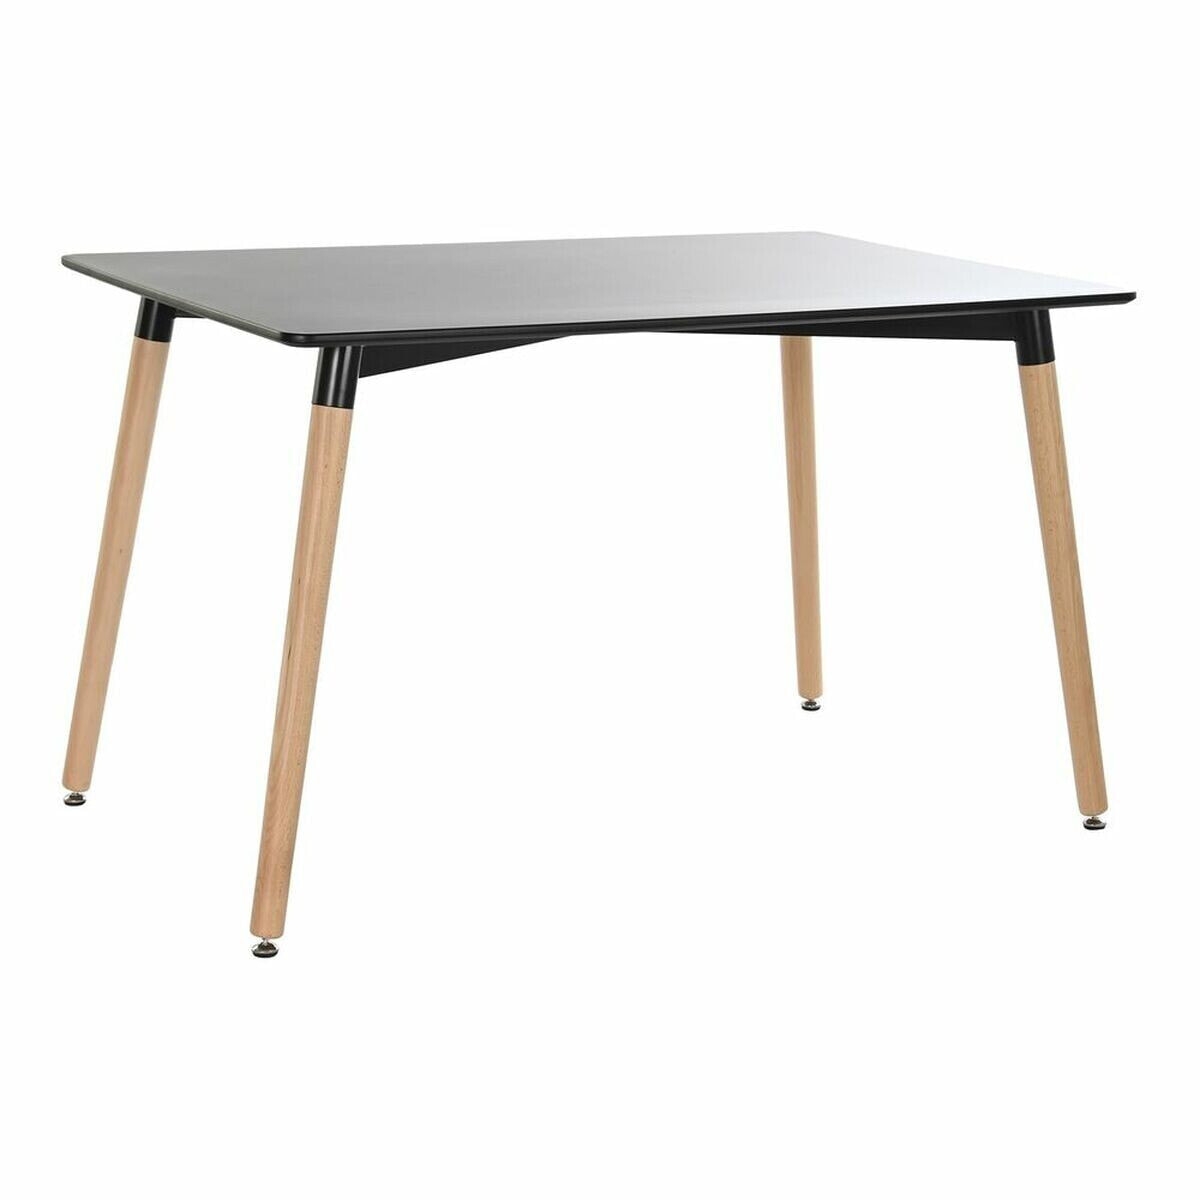 Dining Table DKD Home Decor Black Natural Wood Birch MDF Wood 120 x 80 x 74 cm